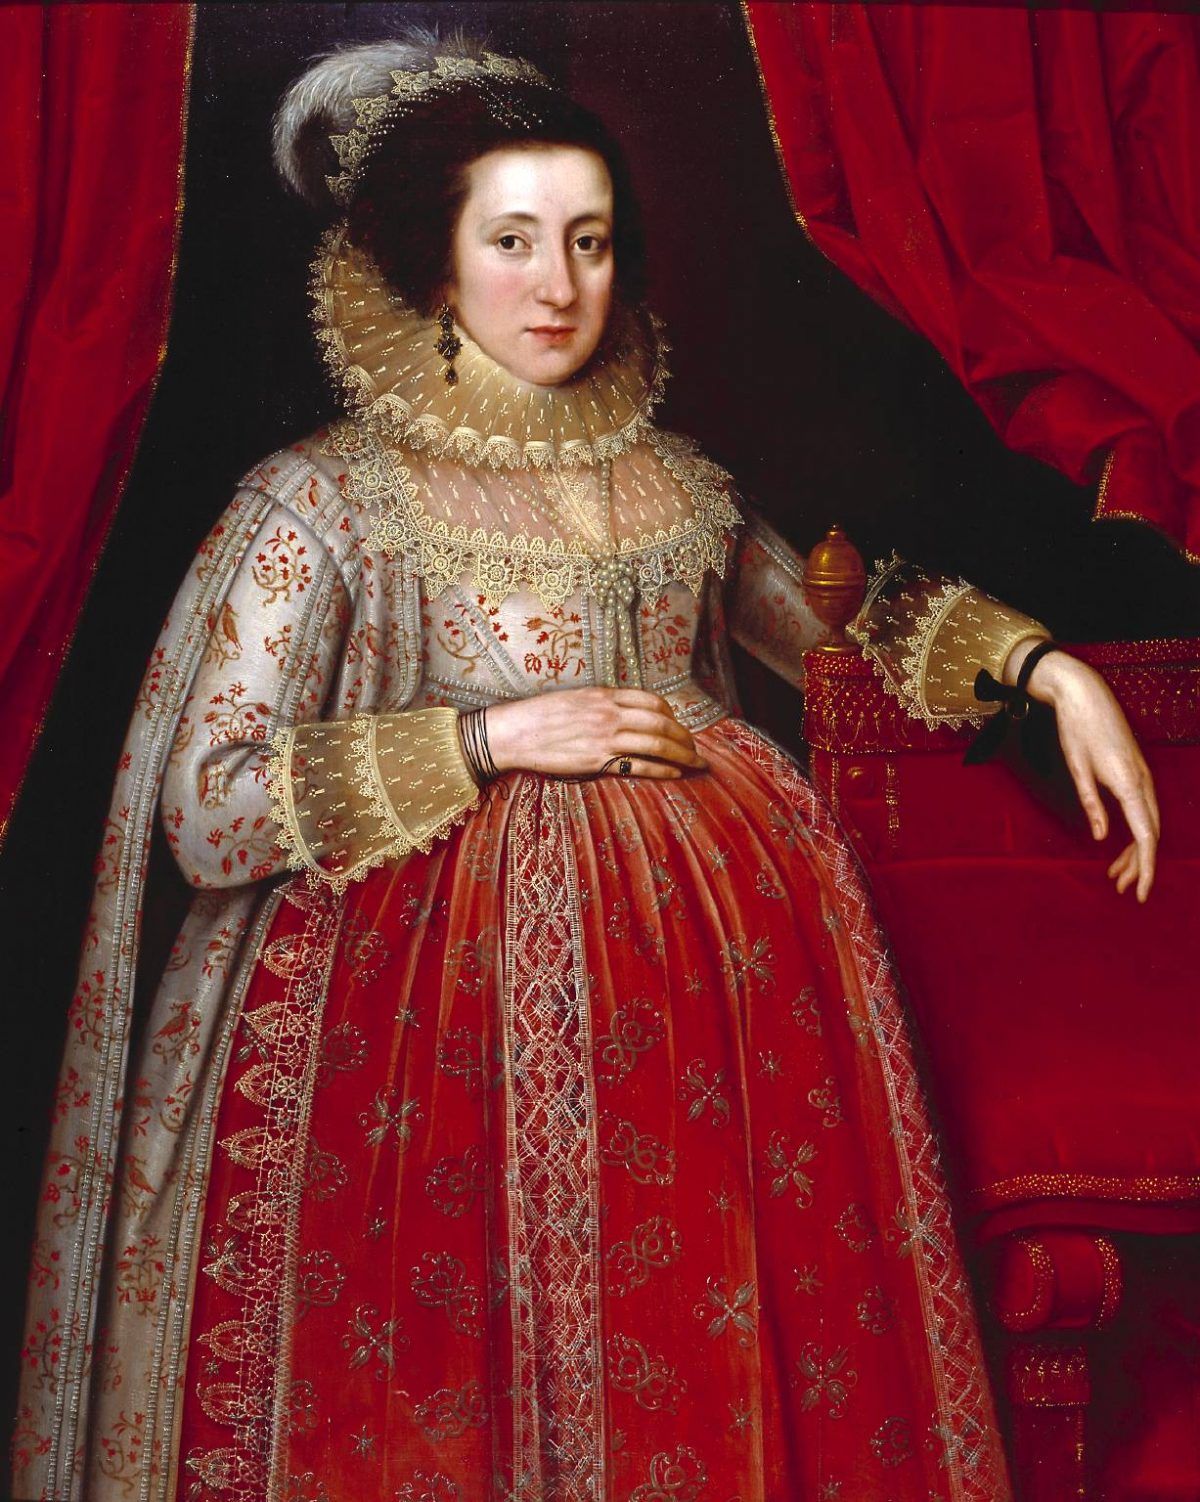 Portrait of a Woman in Red 1620 by Marcus Gheeraerts II (1620). Credit: Tate